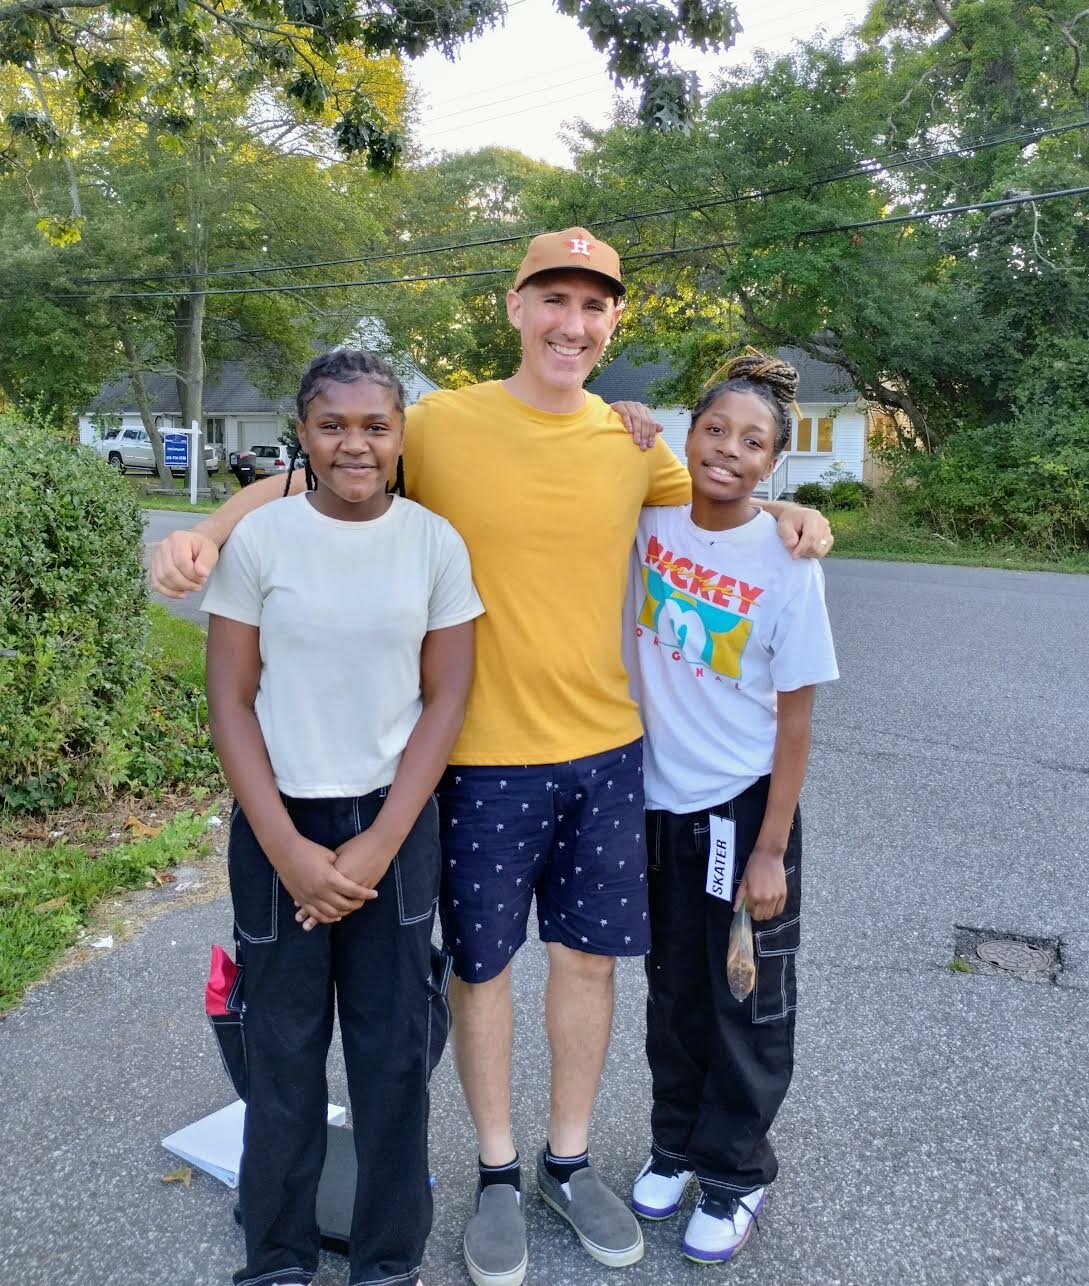 Erica and Eriyonna, both headed to PACA Middle School, pose with founder of Kings Kids Christian Outreach group, PJ Balzer.